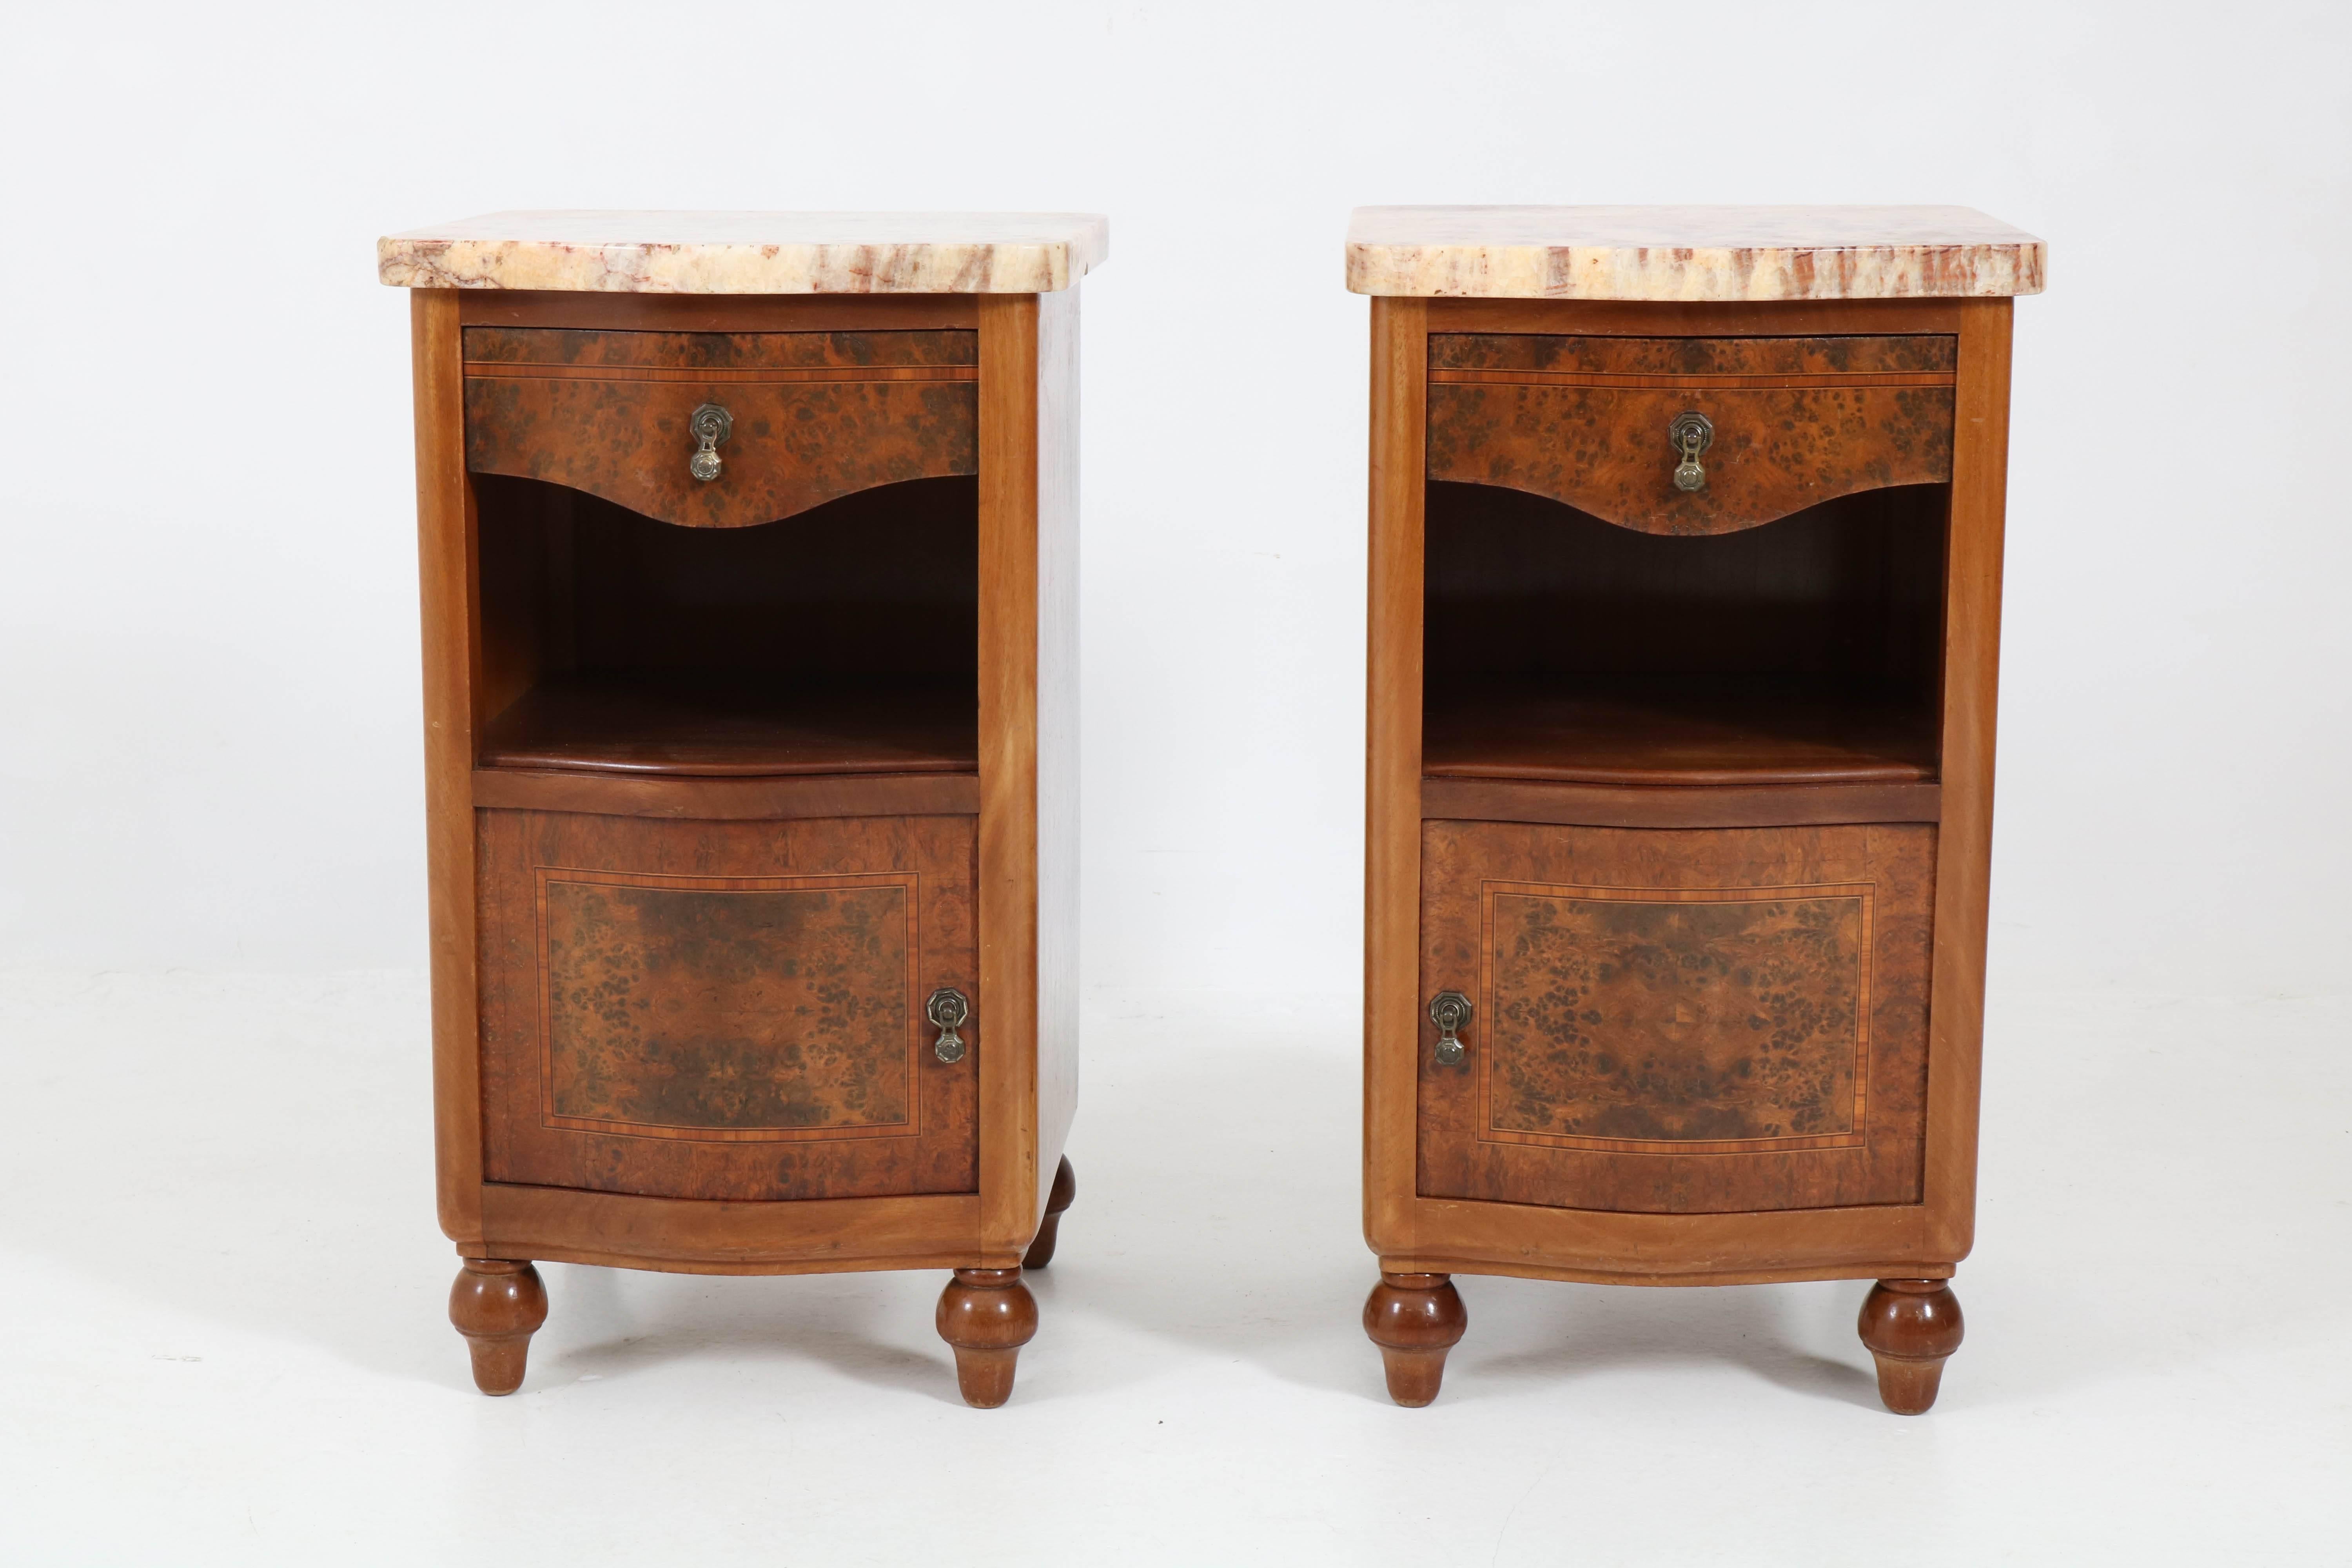 Stunning pair of French Art Deco nightstands or bedside tables, 1930s.
Burl walnut with inlay.
Original colored marble tops.
In good original condition with minor wear consistent with age and use,
preserving a beautiful patina.